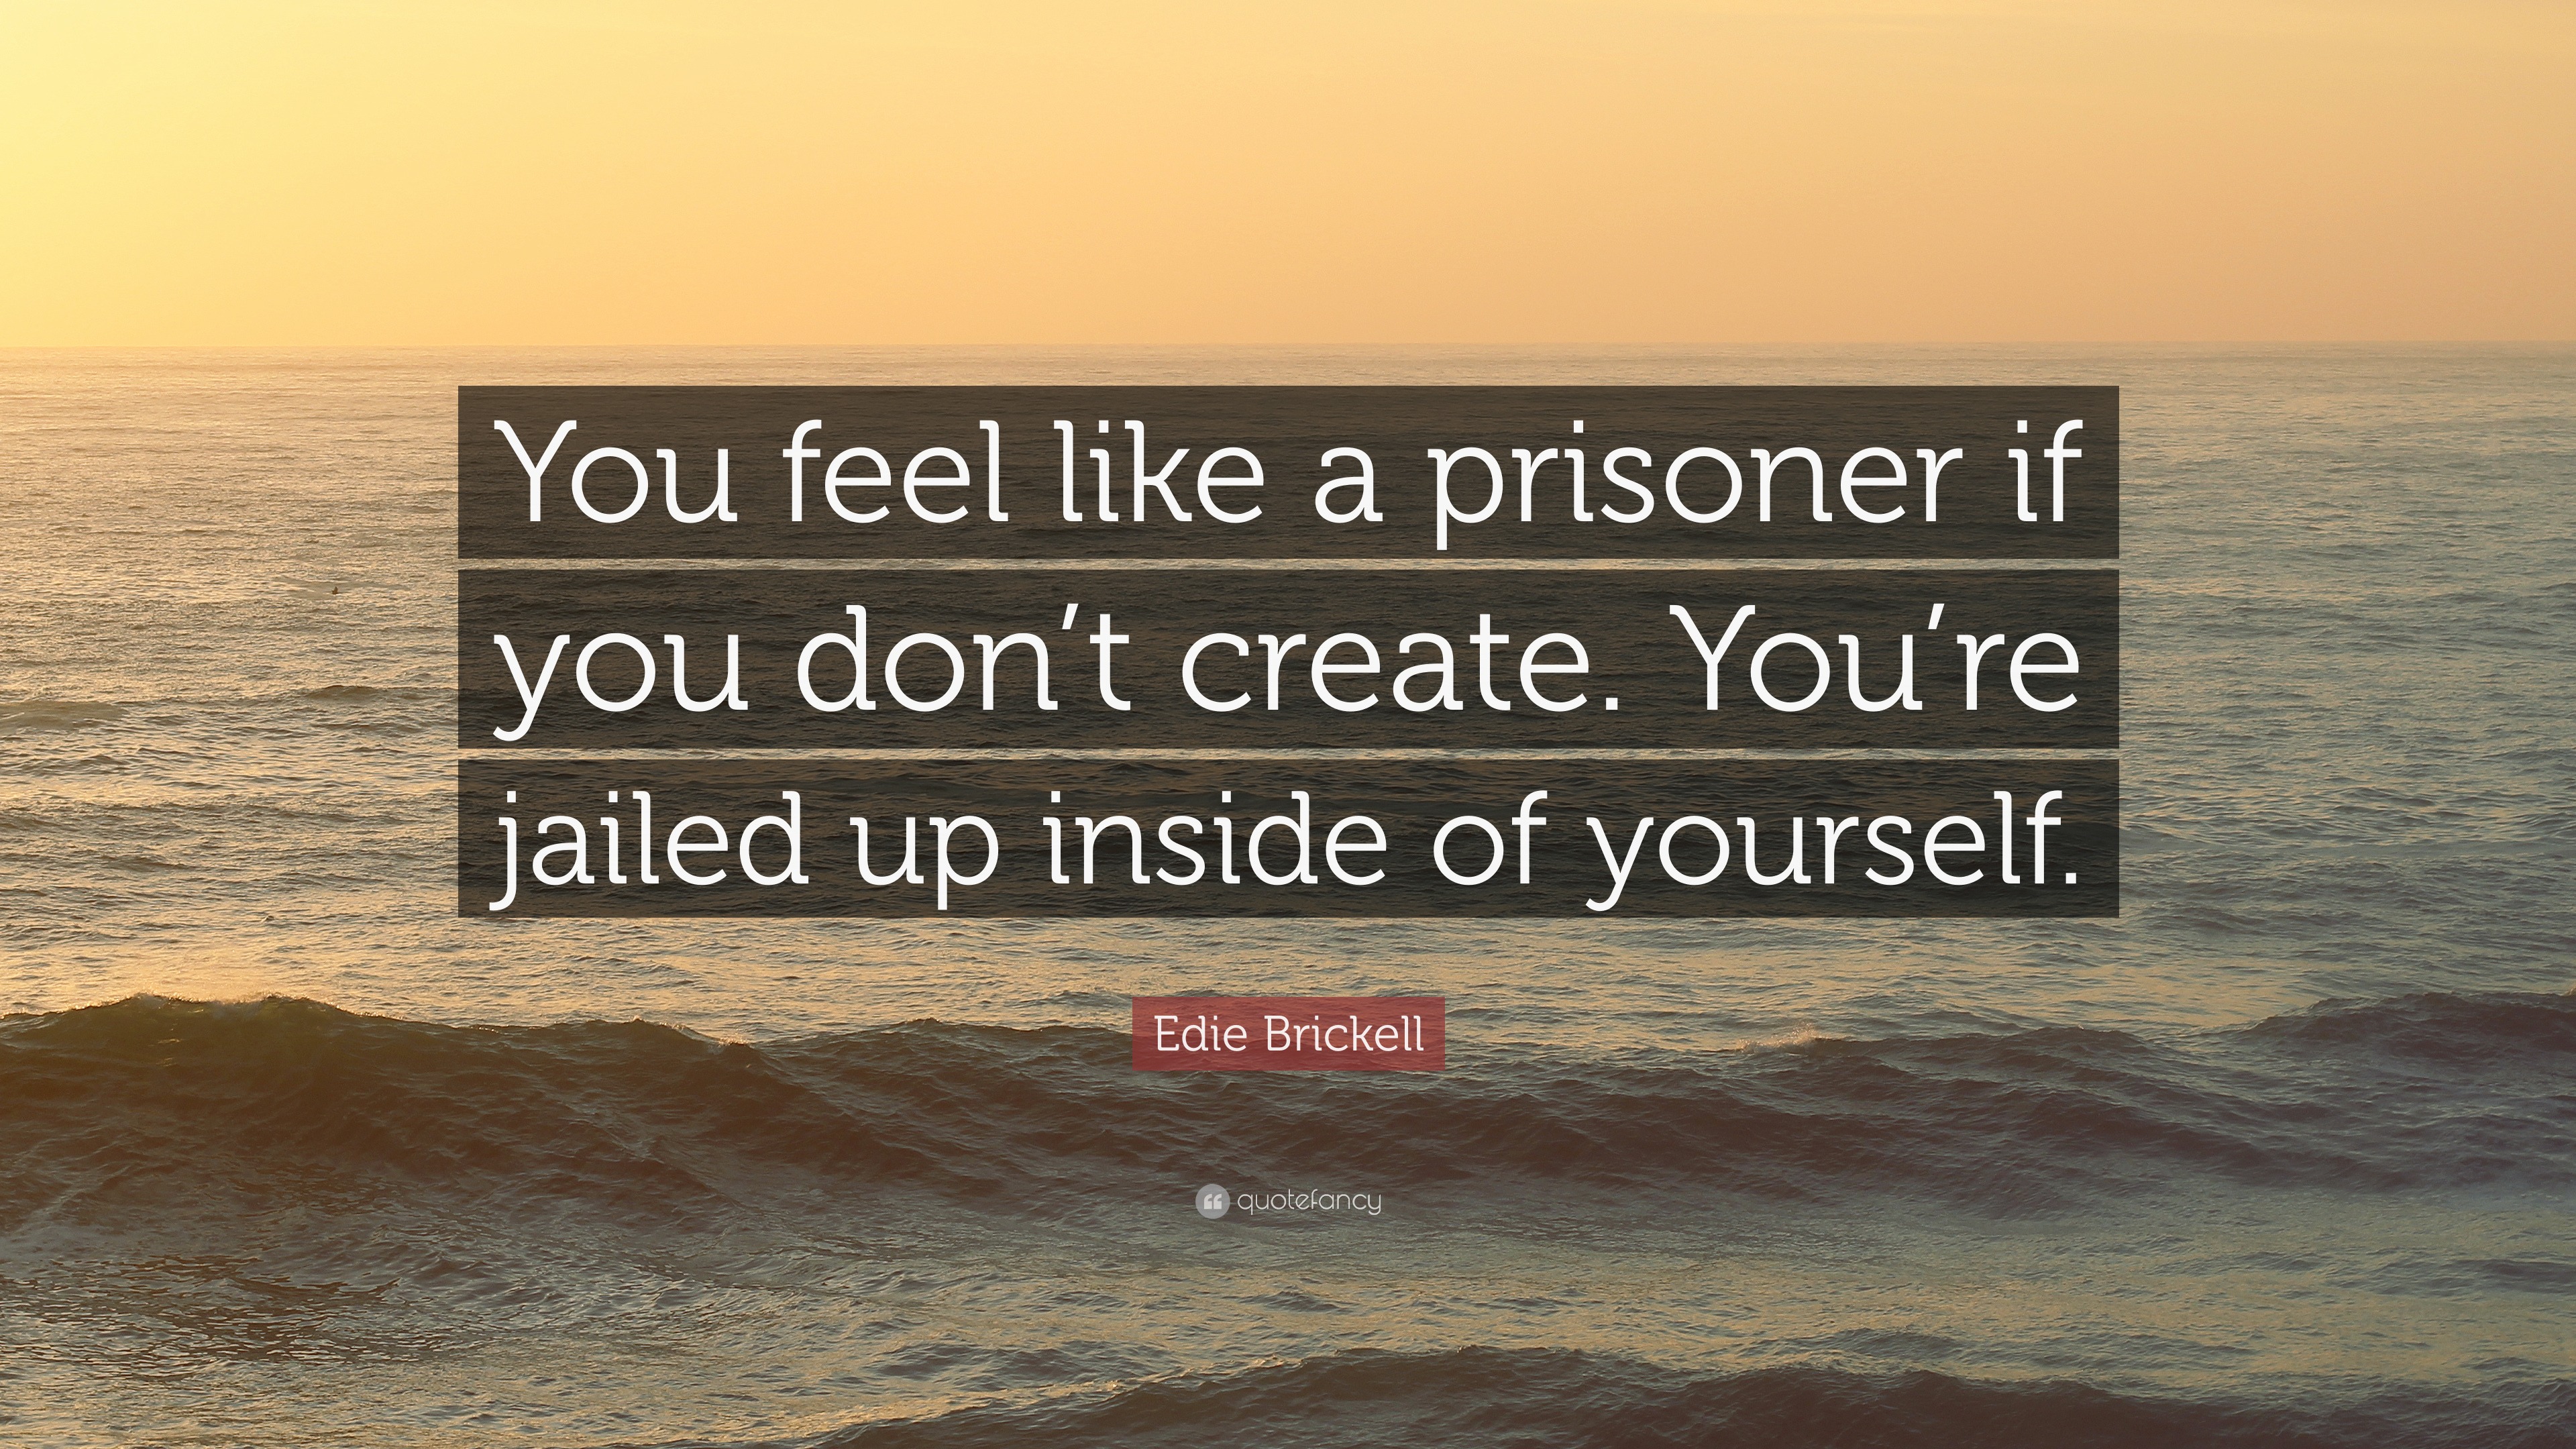 Edie Brickell Quote: “You Feel Like A Prisoner If You Don't Create. You're Jailed